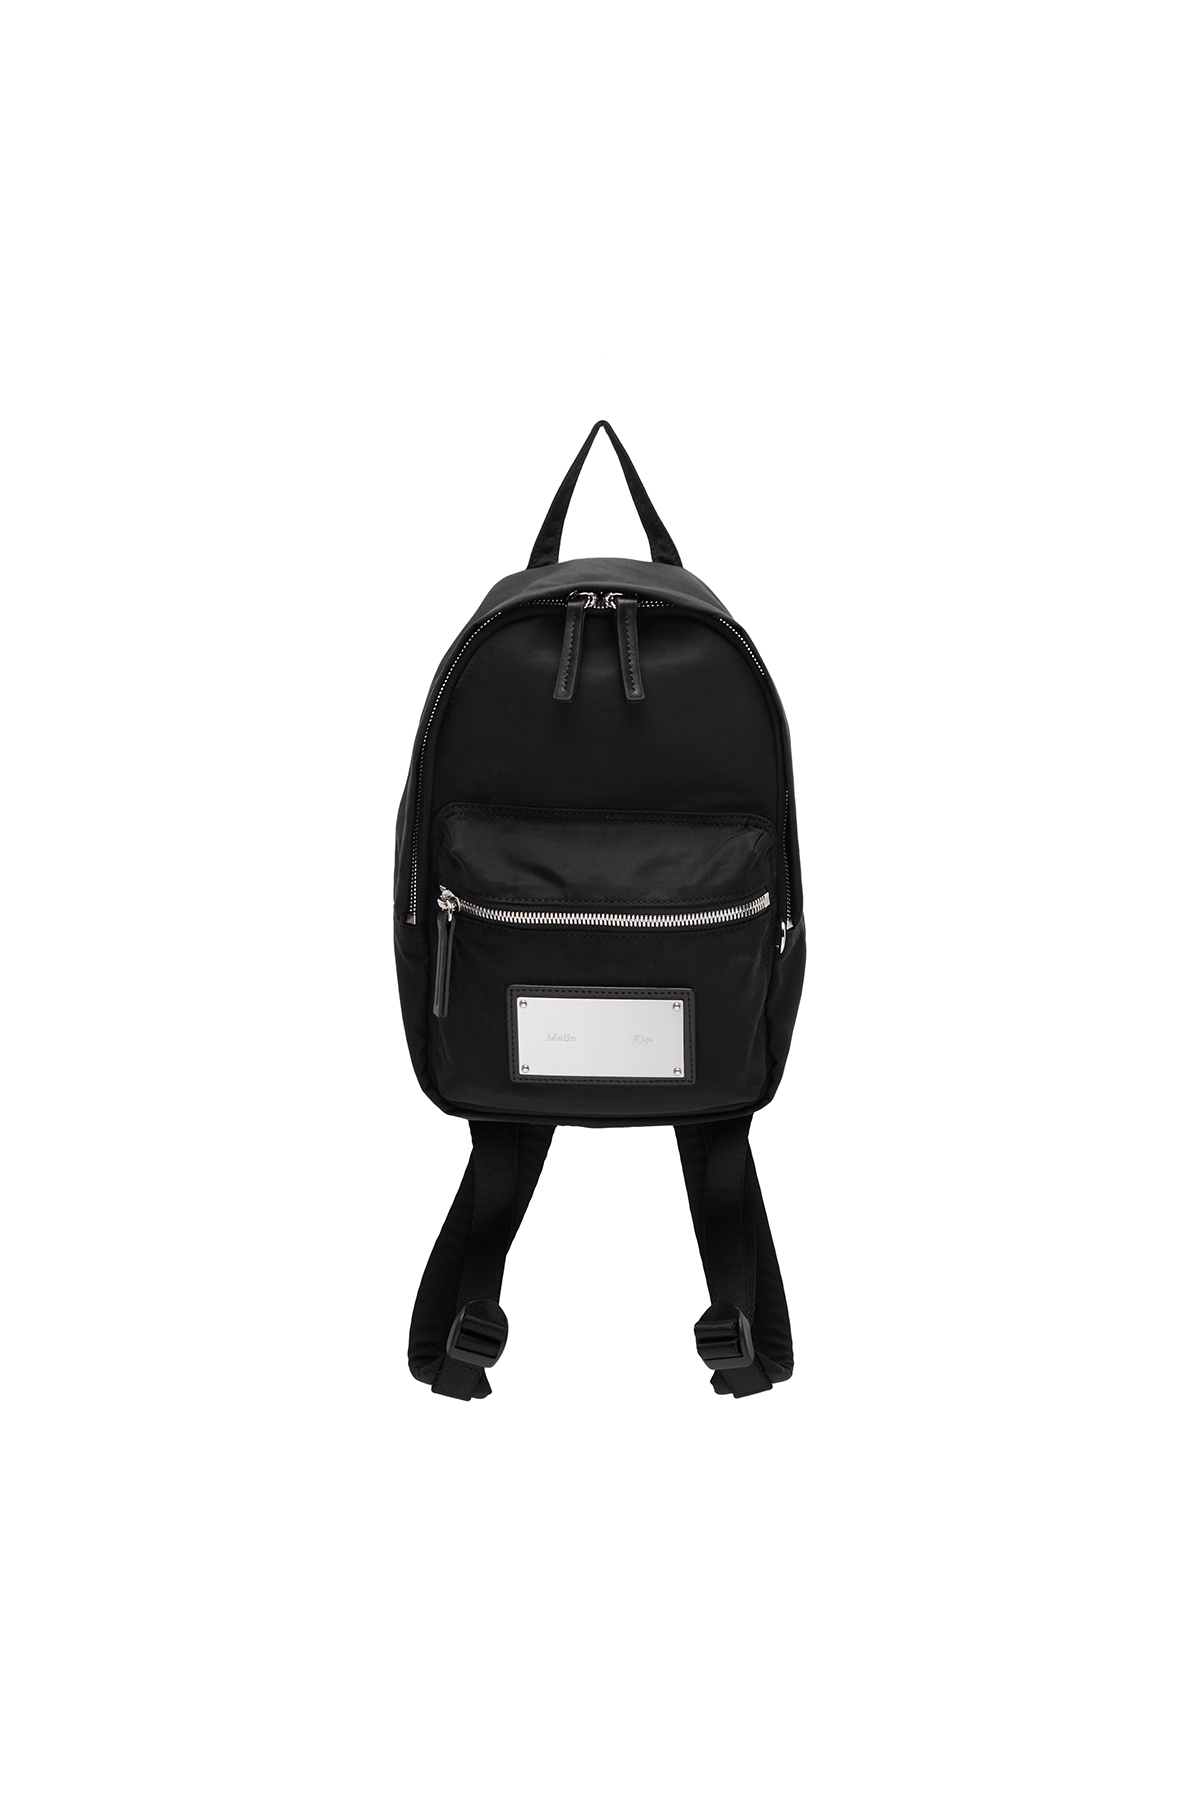 BABY CARGO ALLDAY BACK PACK IN BLACK